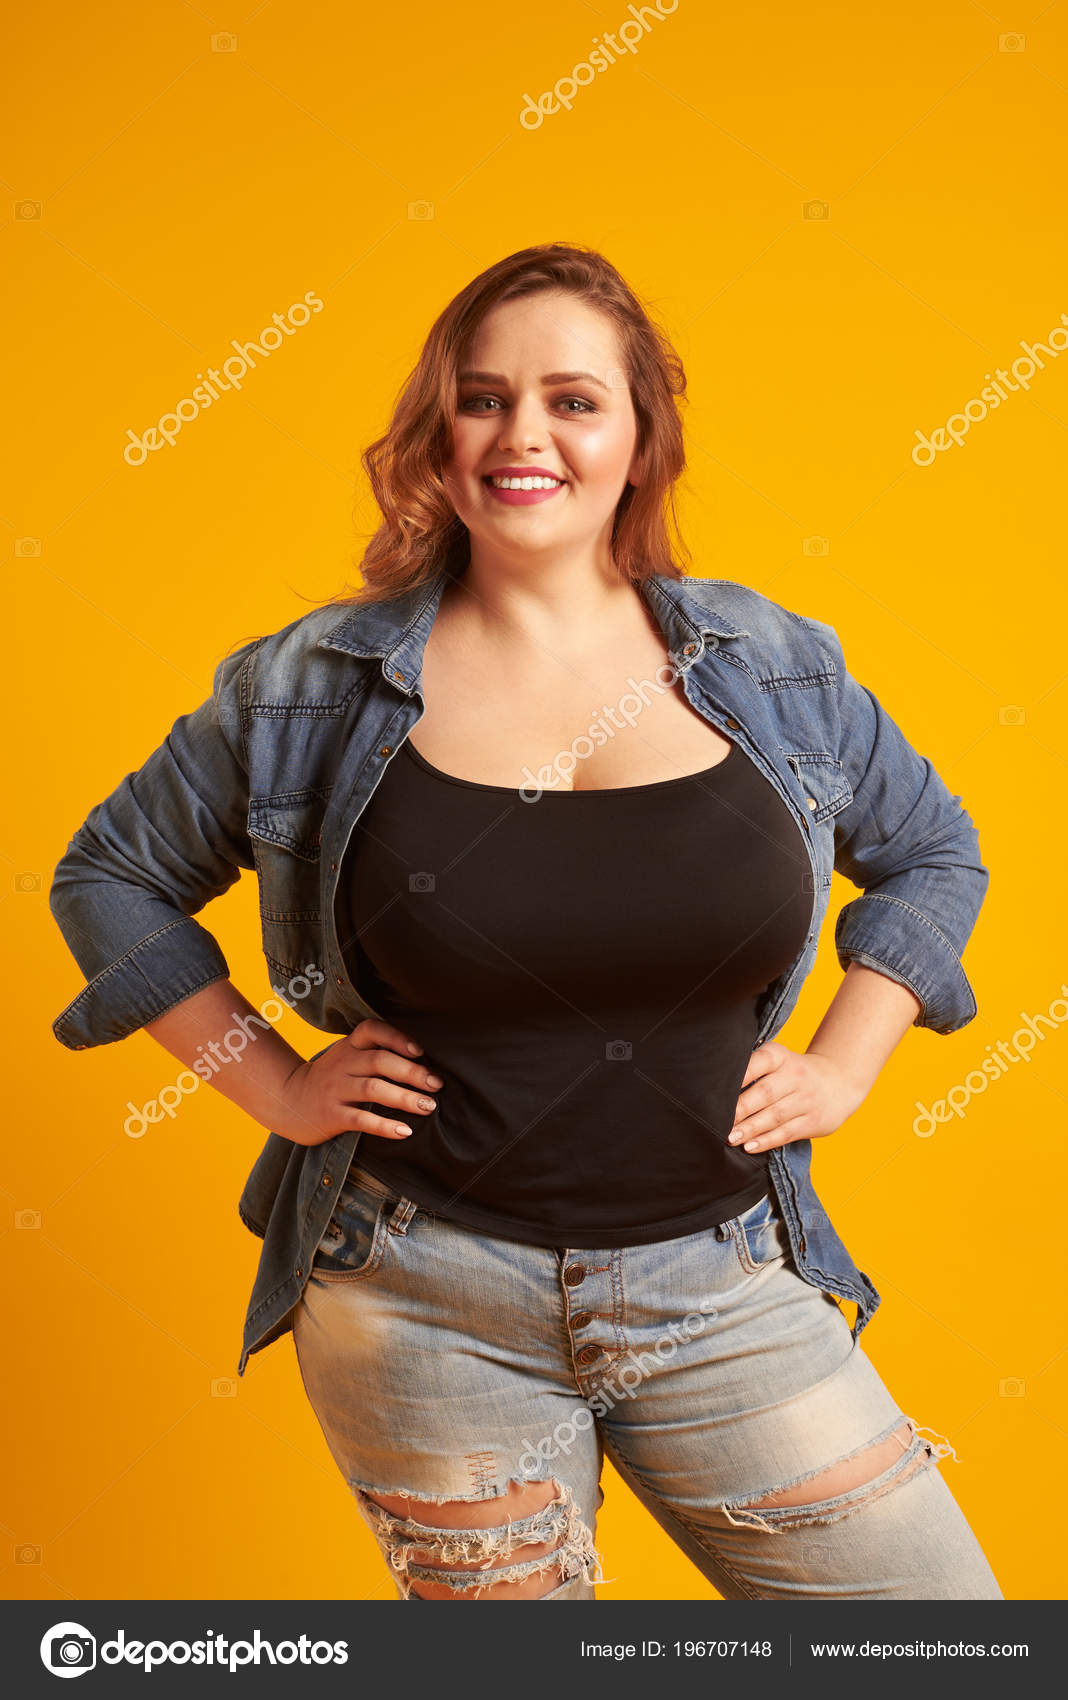 godkende Retfærdighed dug Beautiful plus-size model with big breast smiling at camera Stock Photo by  ©konstantynov 196707148